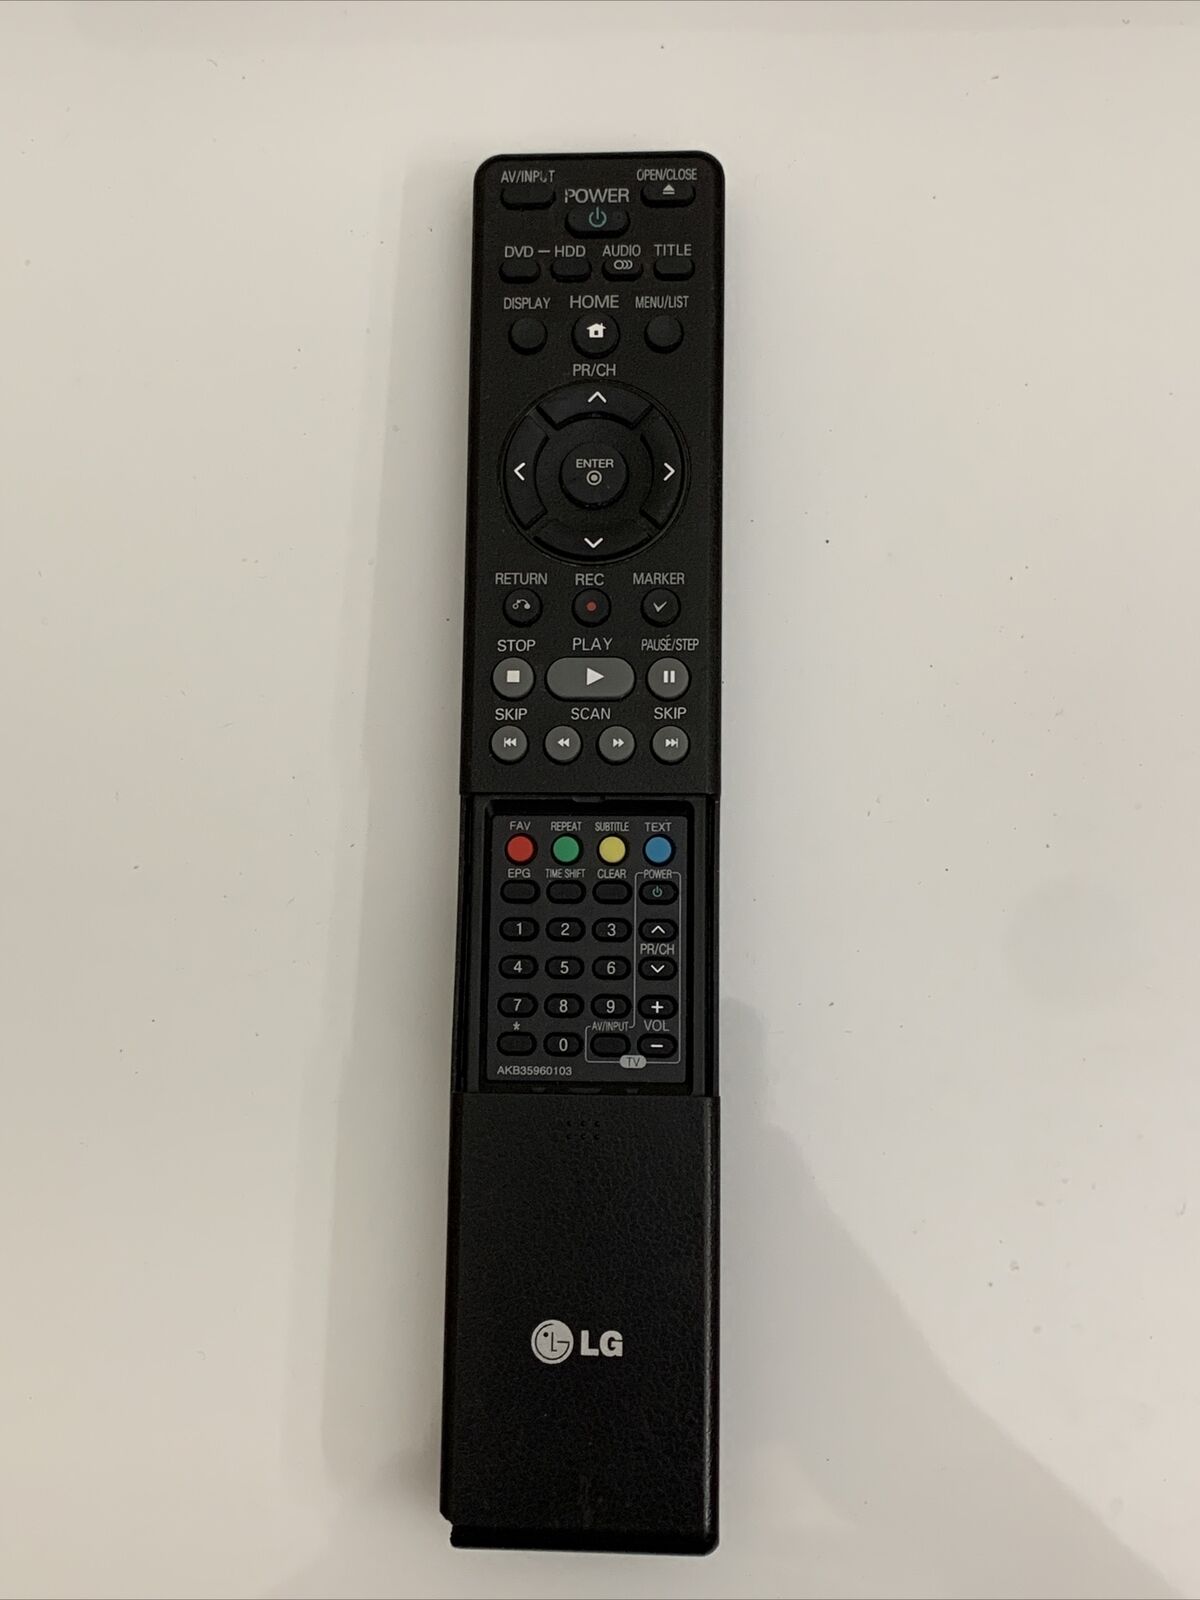 LG AKB35960103 Remote Control for LG DVD HDD Recorder *Missing Battery Lid